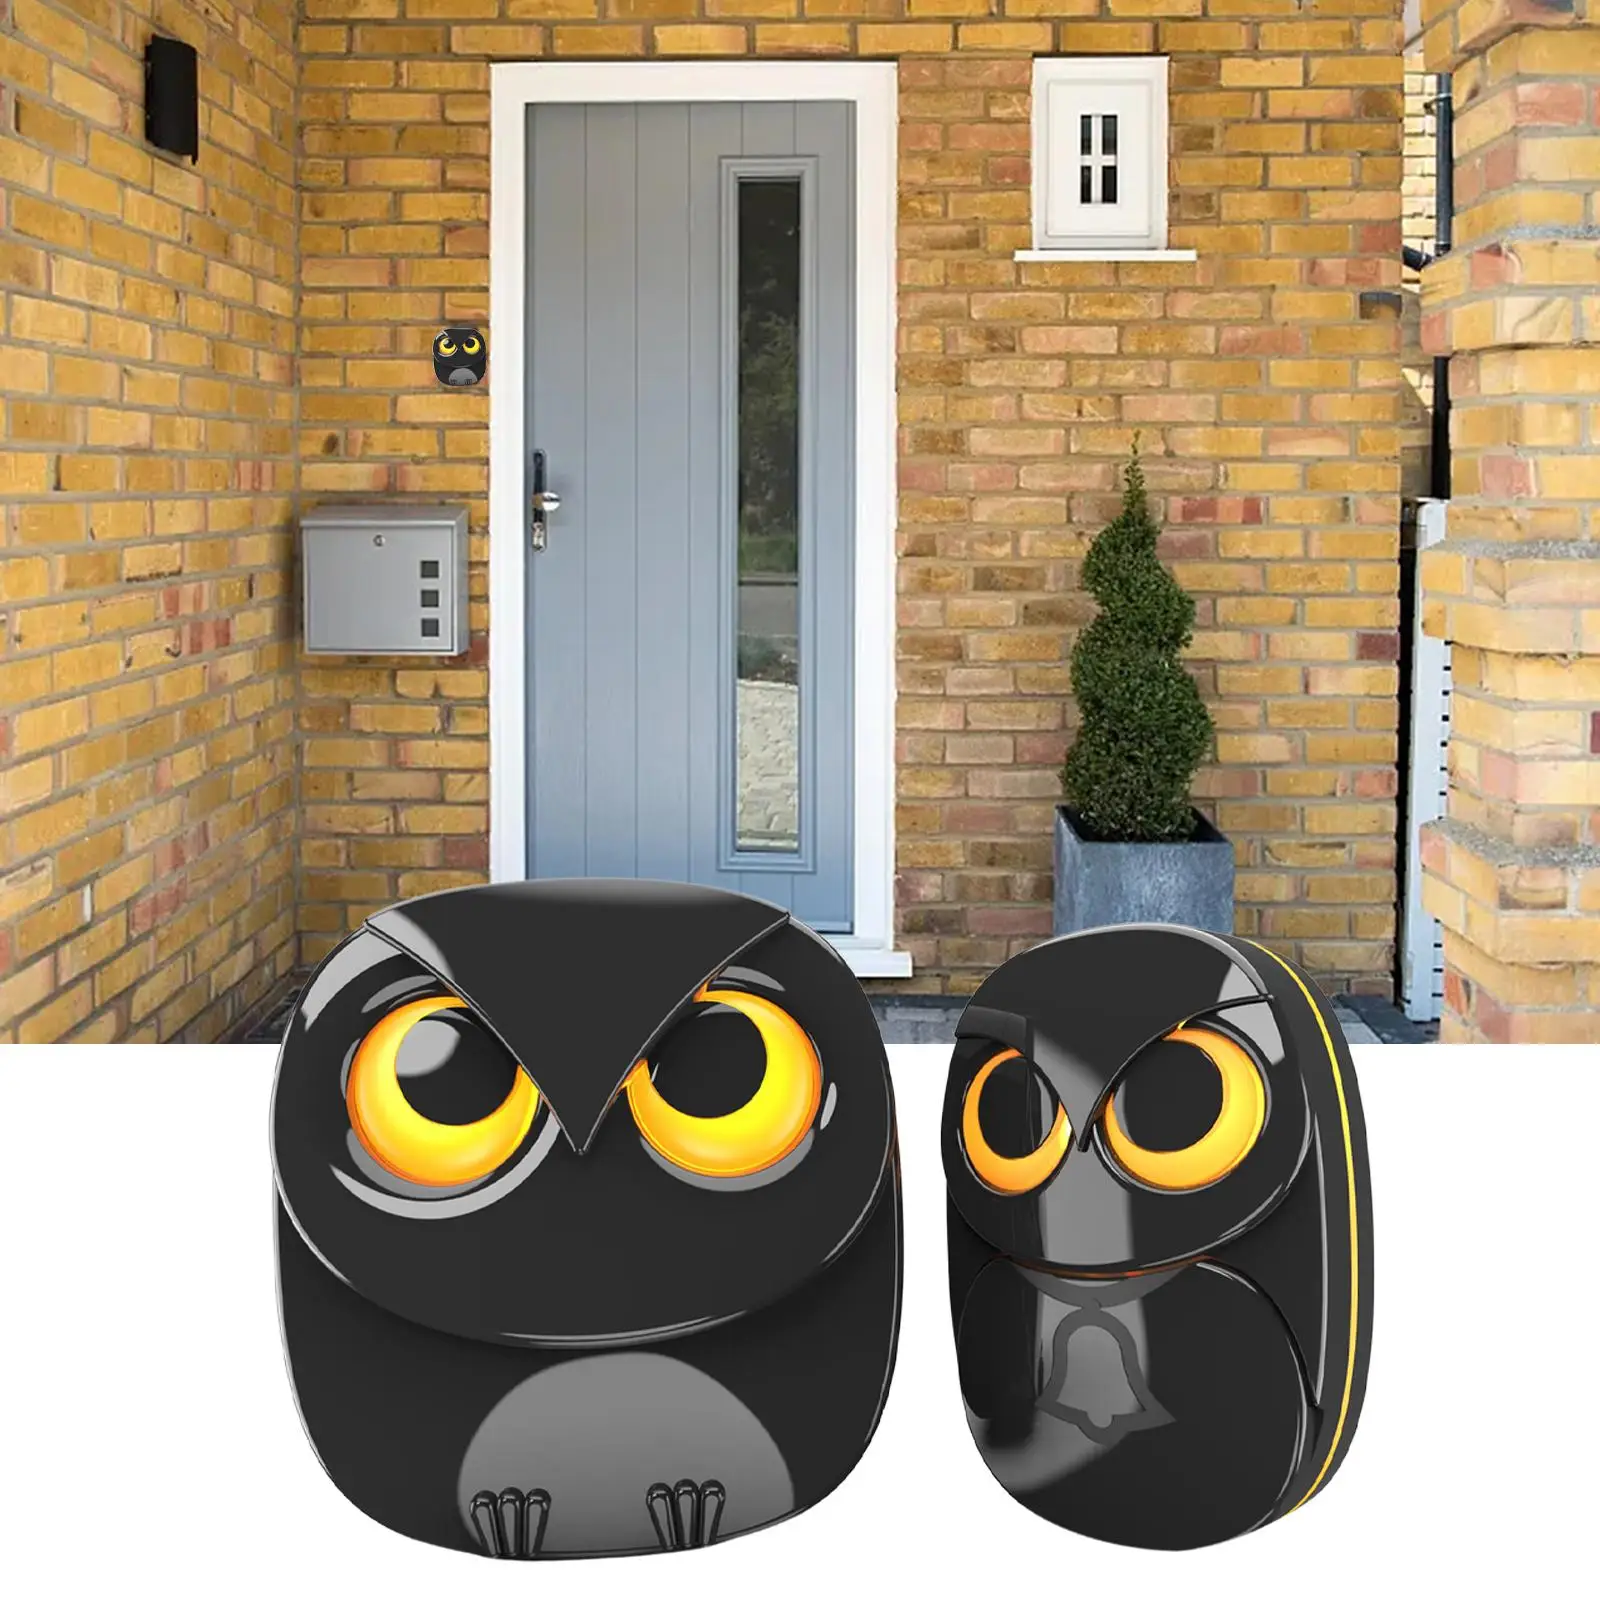 Wireless Driveway Security Alarm Decor Devices Simple to Use Stable Motion Sensor and Detector for Gate Home Garage Shed UK Plug